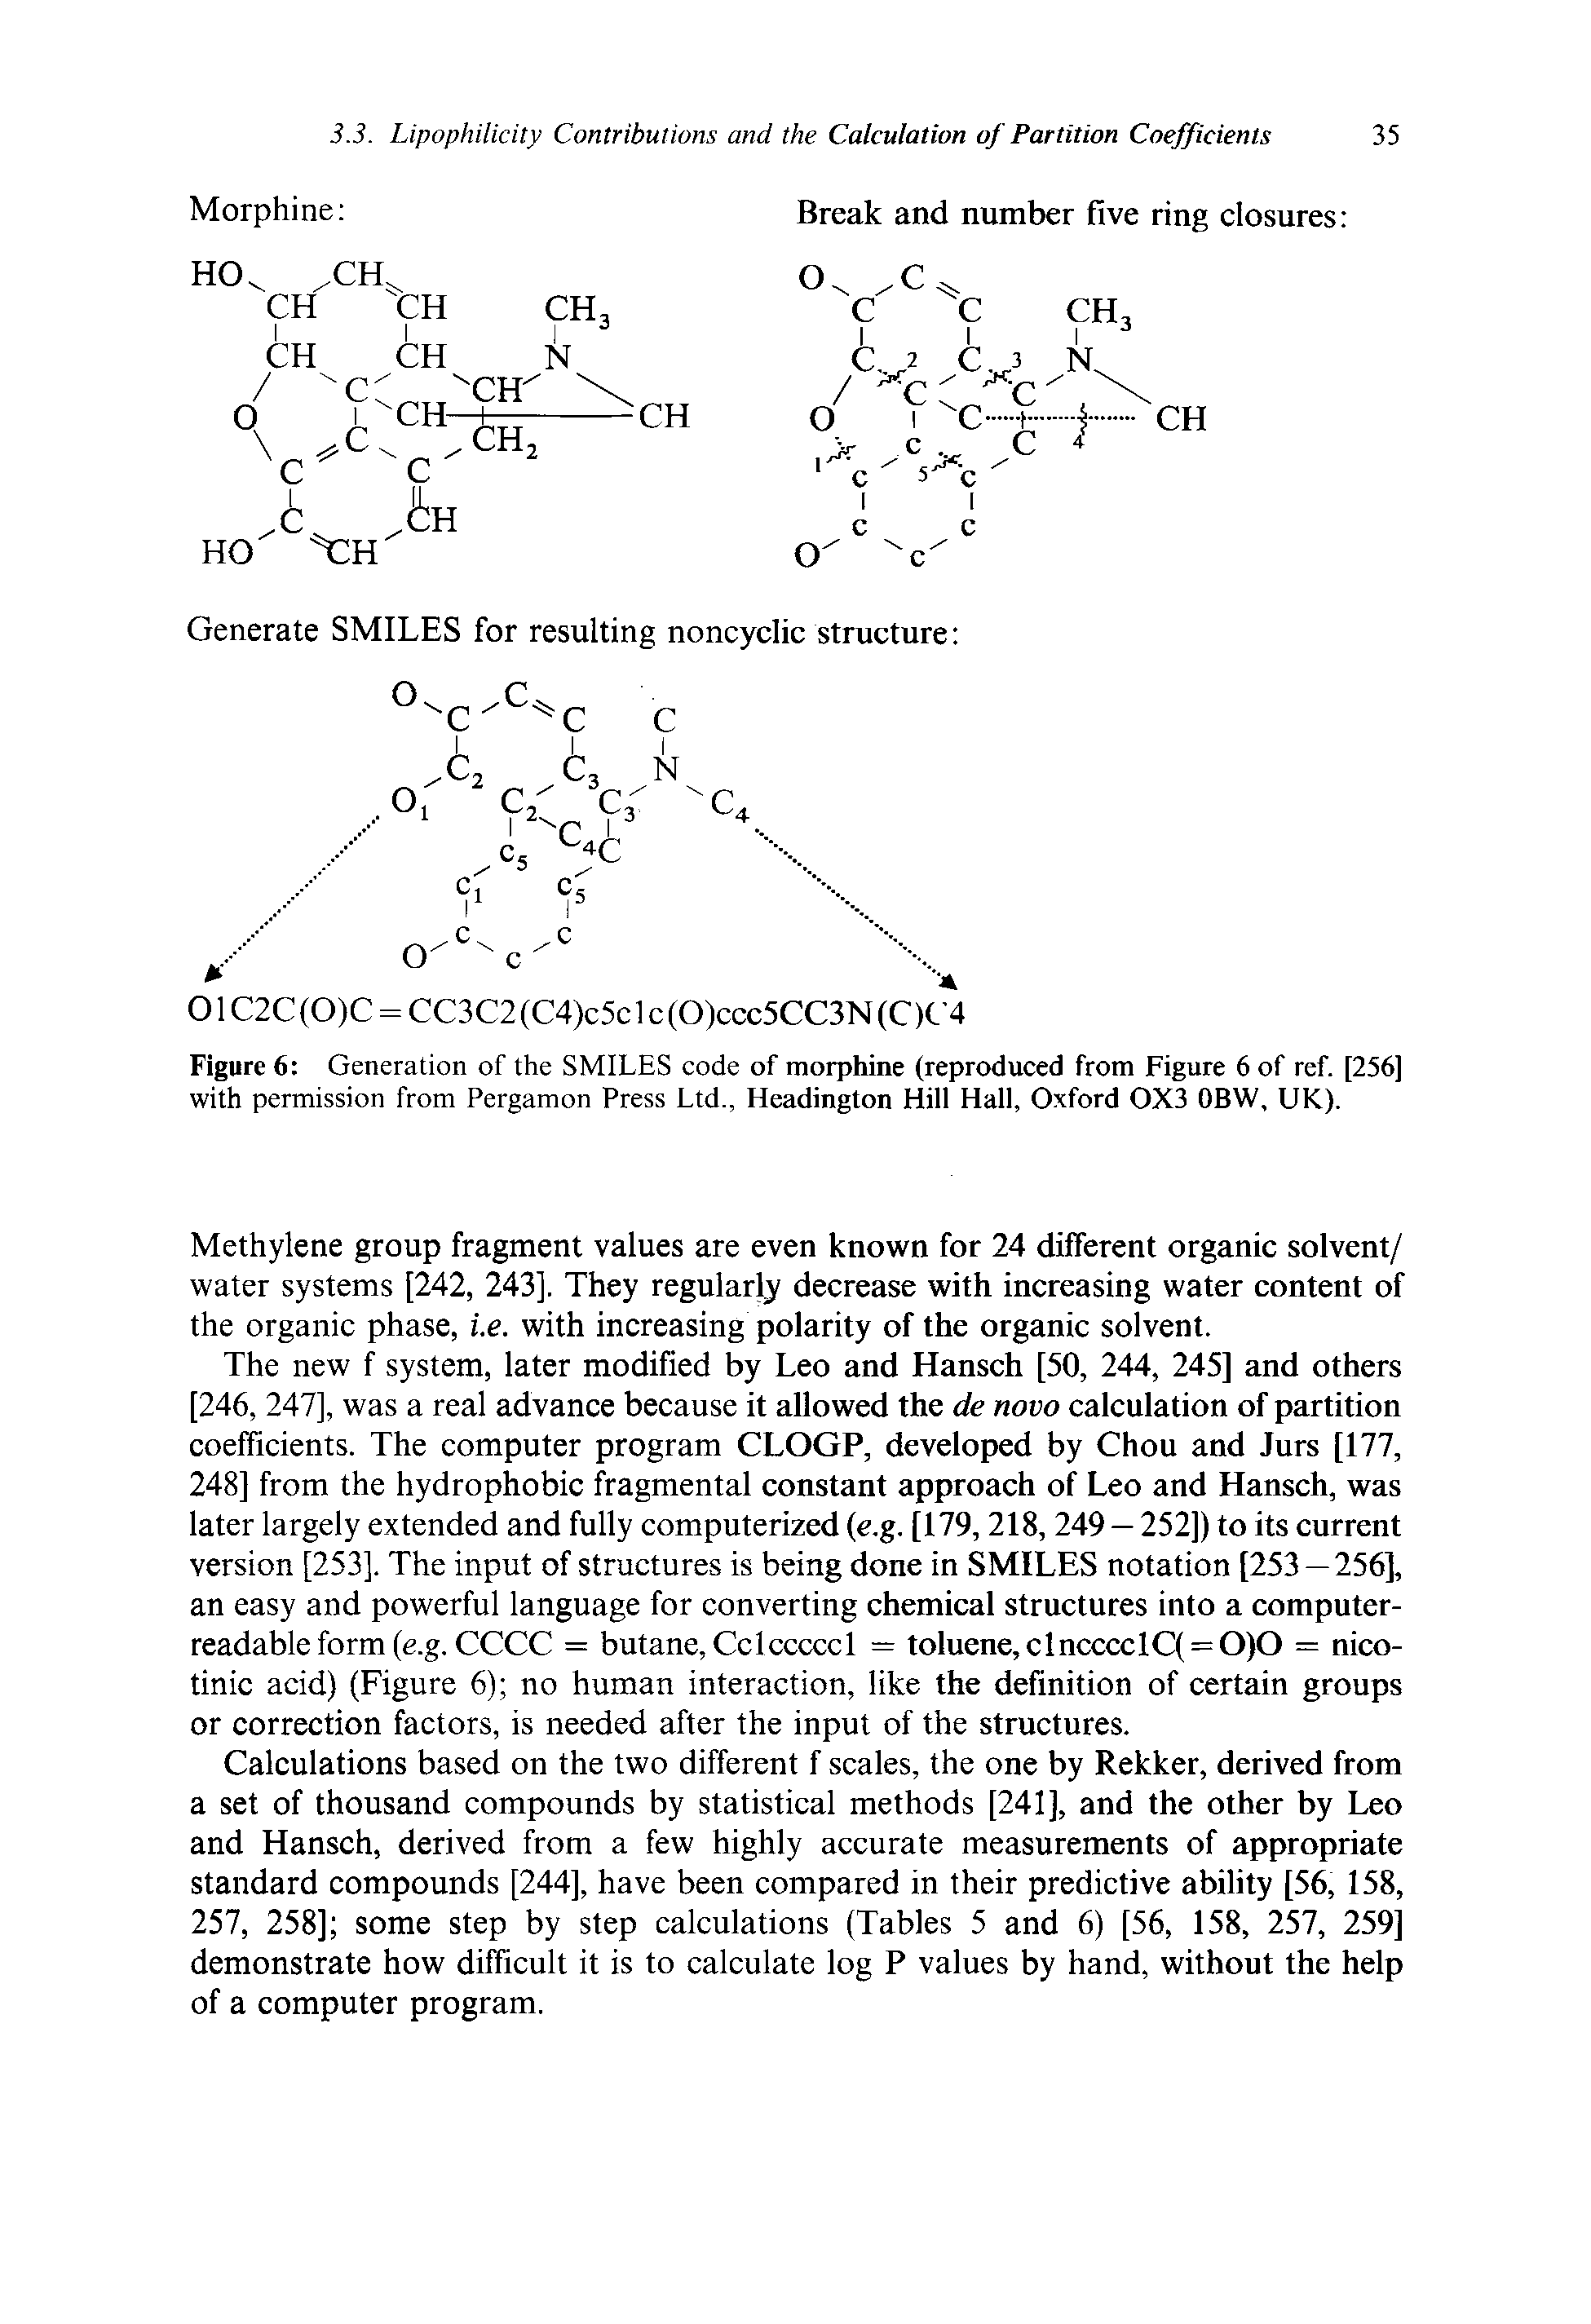 Figure 6 Generation of the SMILES code of morphine (reproduced from Figure 6 of ref. [256] with permission from Pergamon Press Ltd., Headington Hill Hall, Oxford 0X3 OBW, UK).